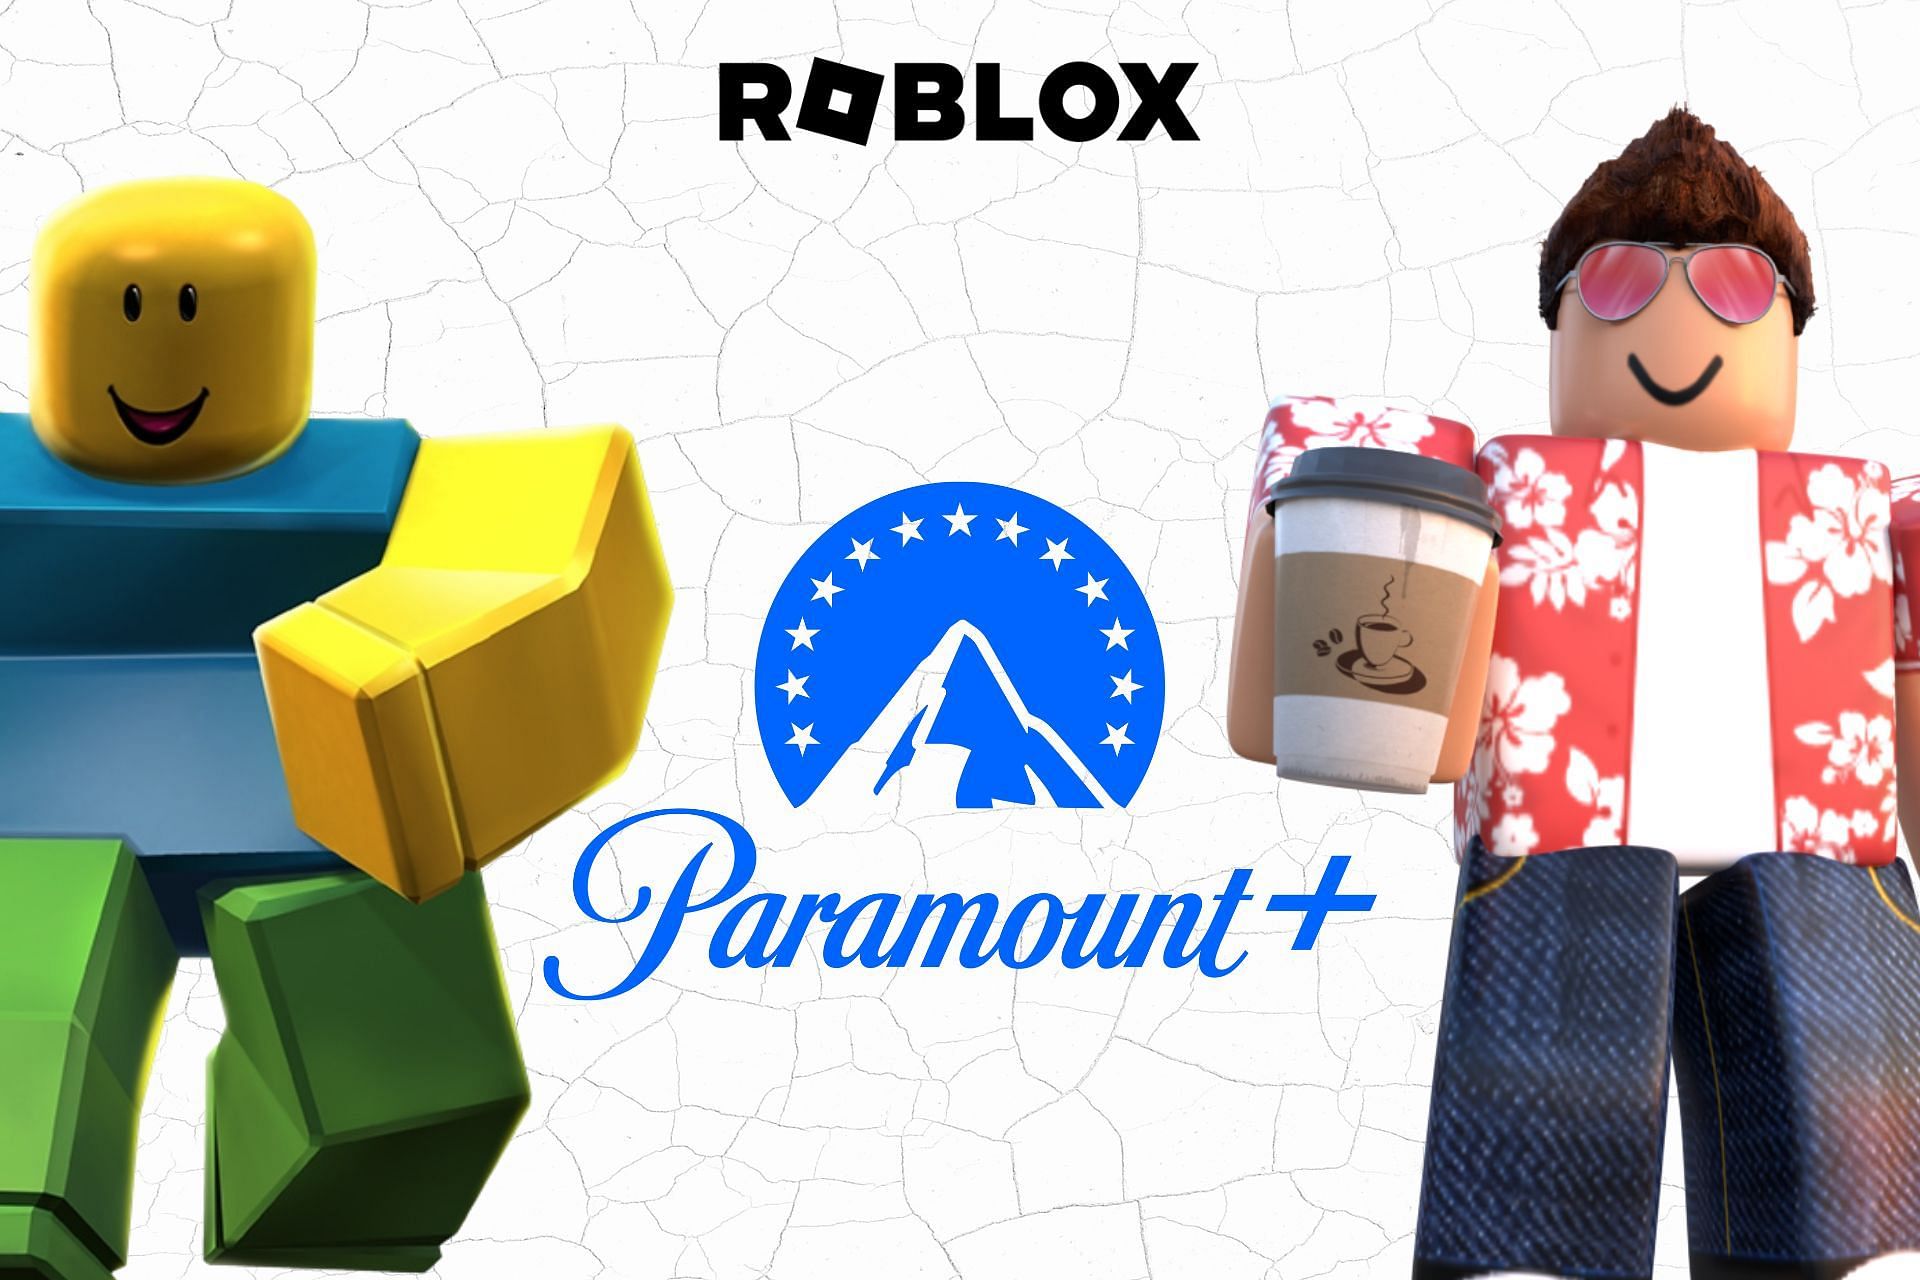 Roblox: How to Get All Free Items in Walmart Land